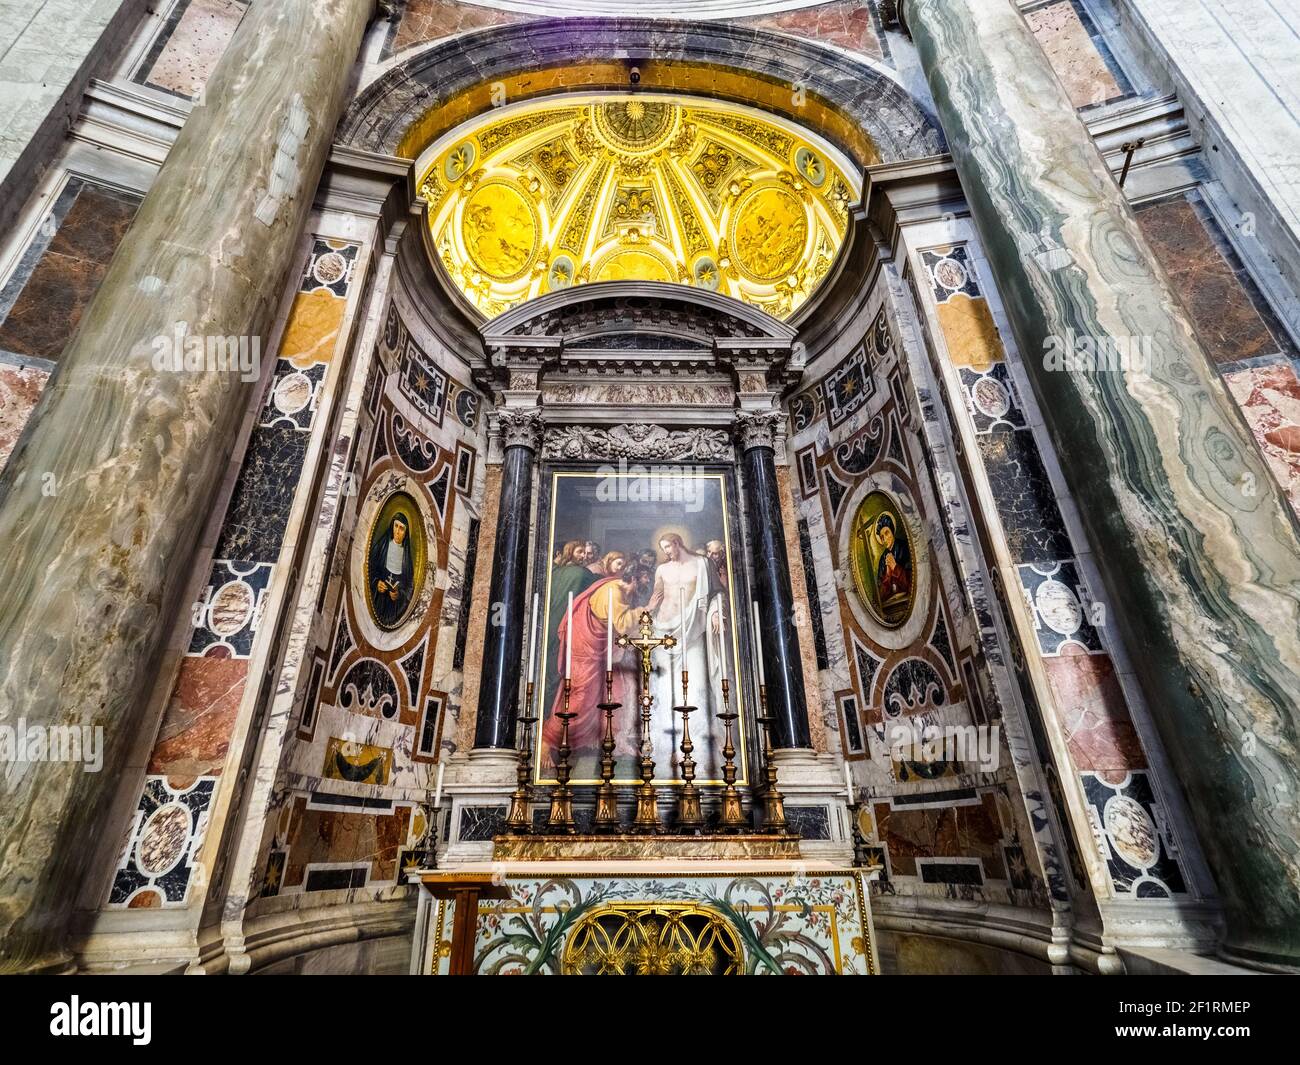 Alter of St. Thomas. The incredulity of St. Thomas. The risen Christ invites the Apostle Thomas to touch His chest wound and believe in the Resurrection. The marble sarcophagus underneath contains the relics of Pope Boniface IV (608-615) - Saint Peter Basilica, Vatican State in Rome Stock Photo